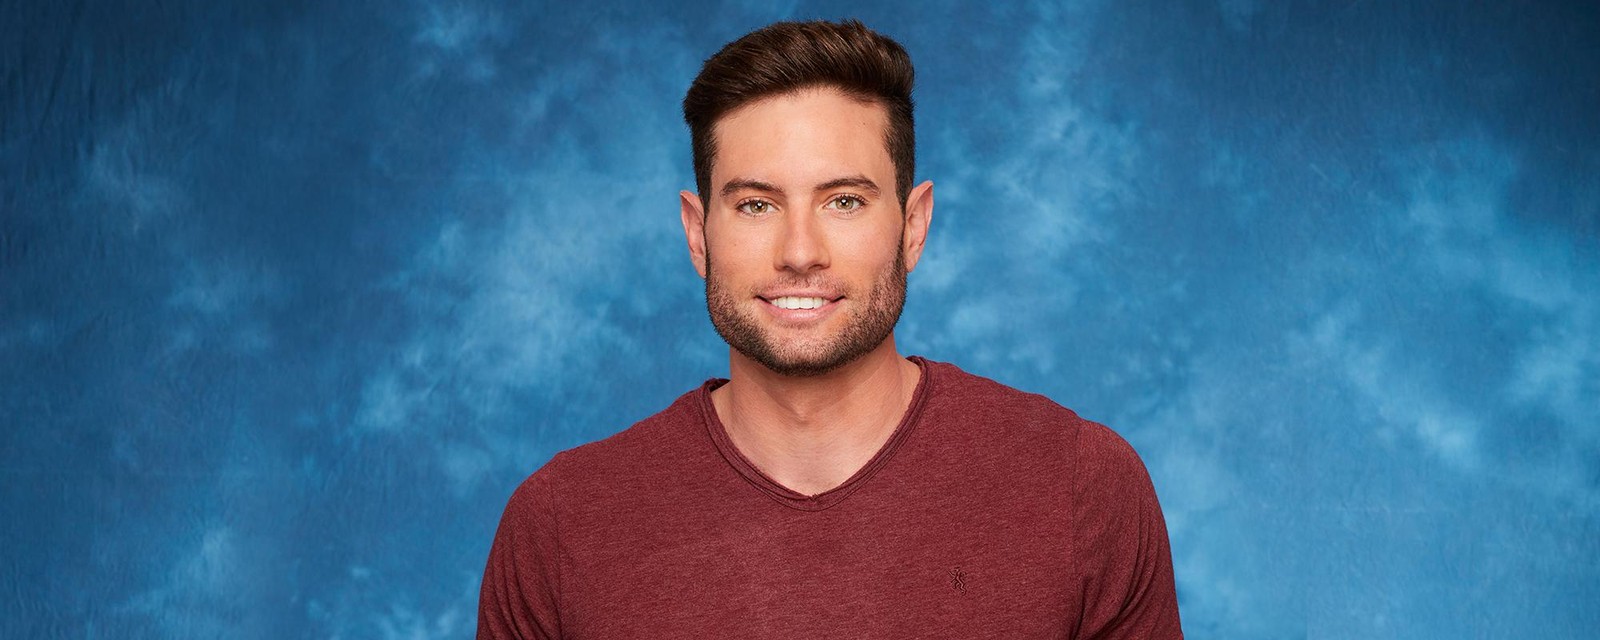 Bryce Powers -  Bachelorette 13 - **Sleuthing Spoilers** 1600x640-Q90_d62caeef4d9d3701df8c990927eb70c0